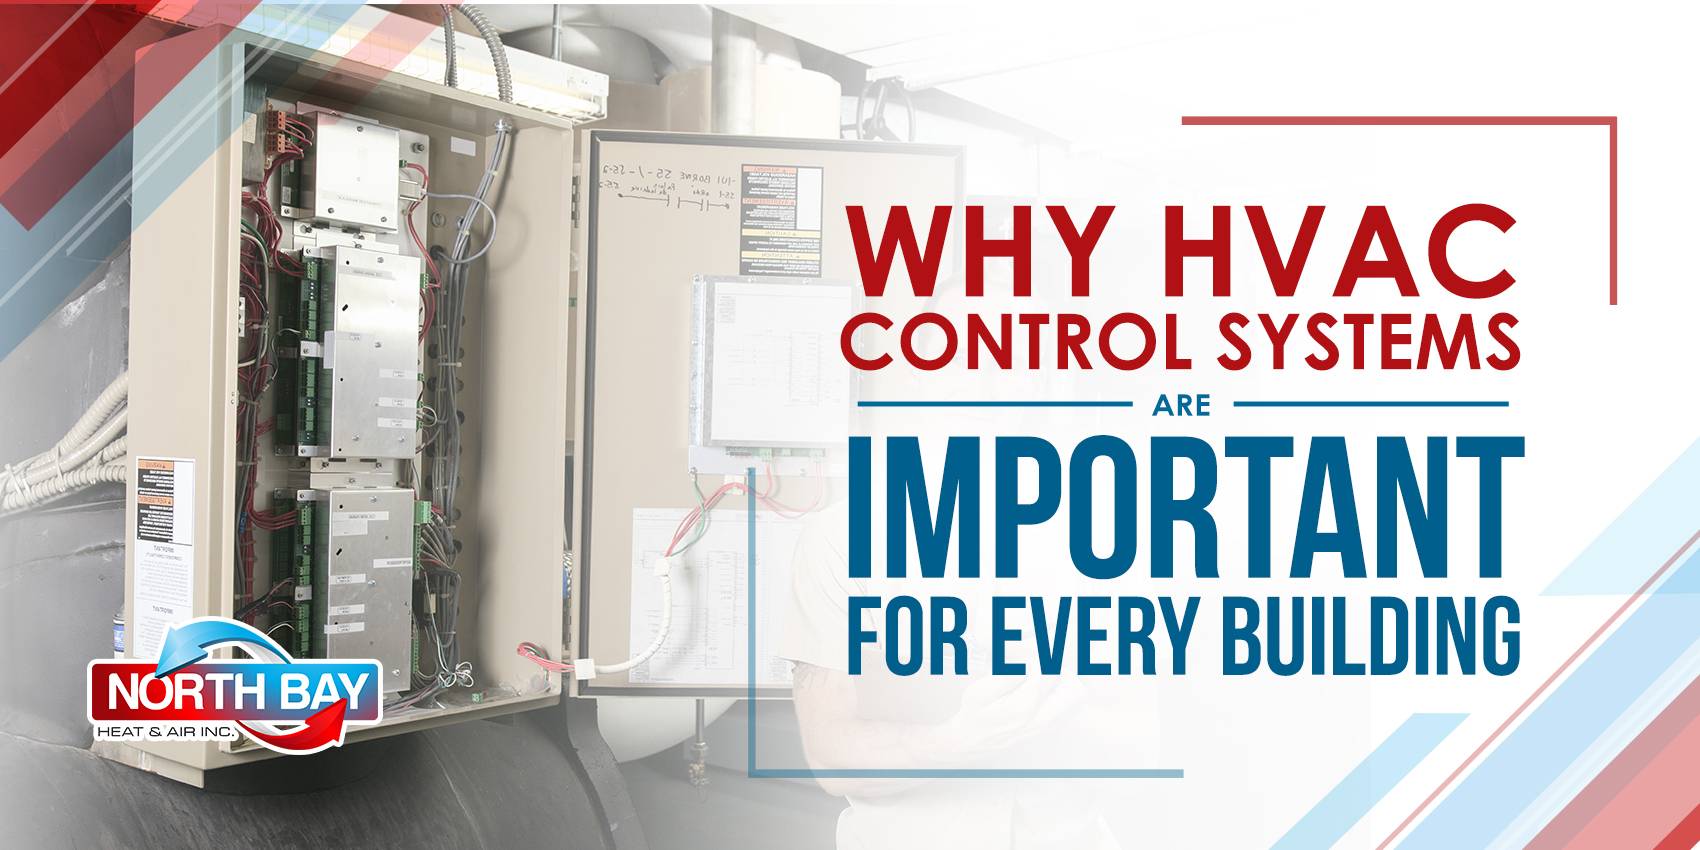 Why HVAC Control Systems are Important for Every Building